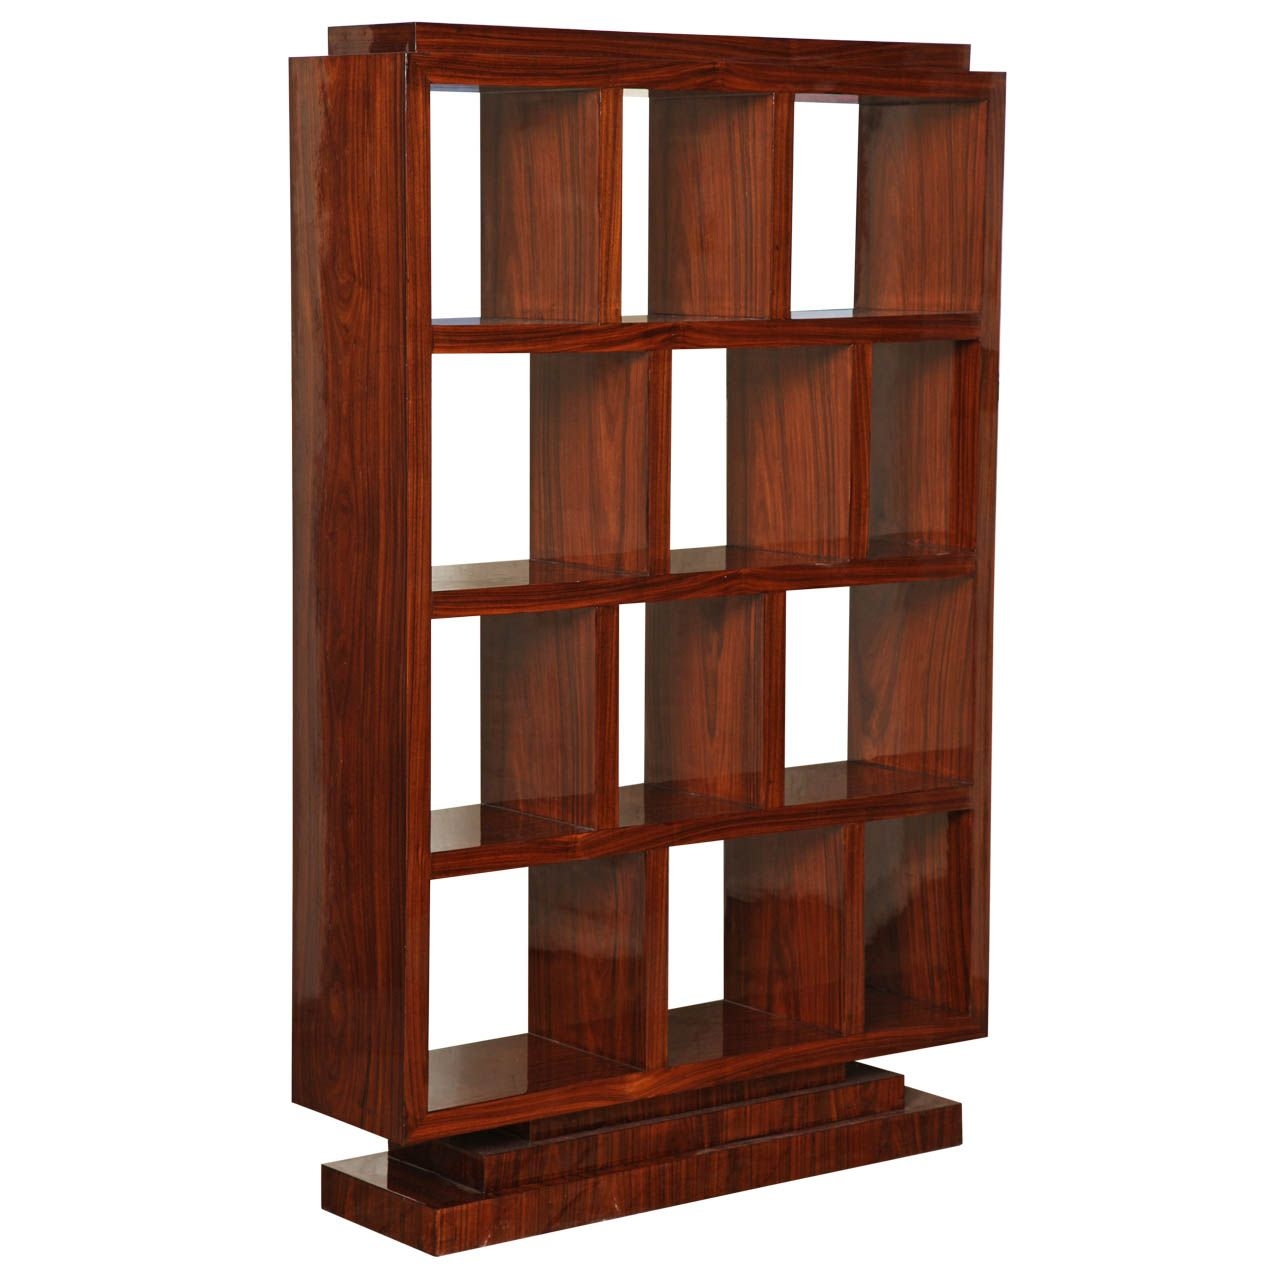 Art deco bookcase from a unique collection of antique and